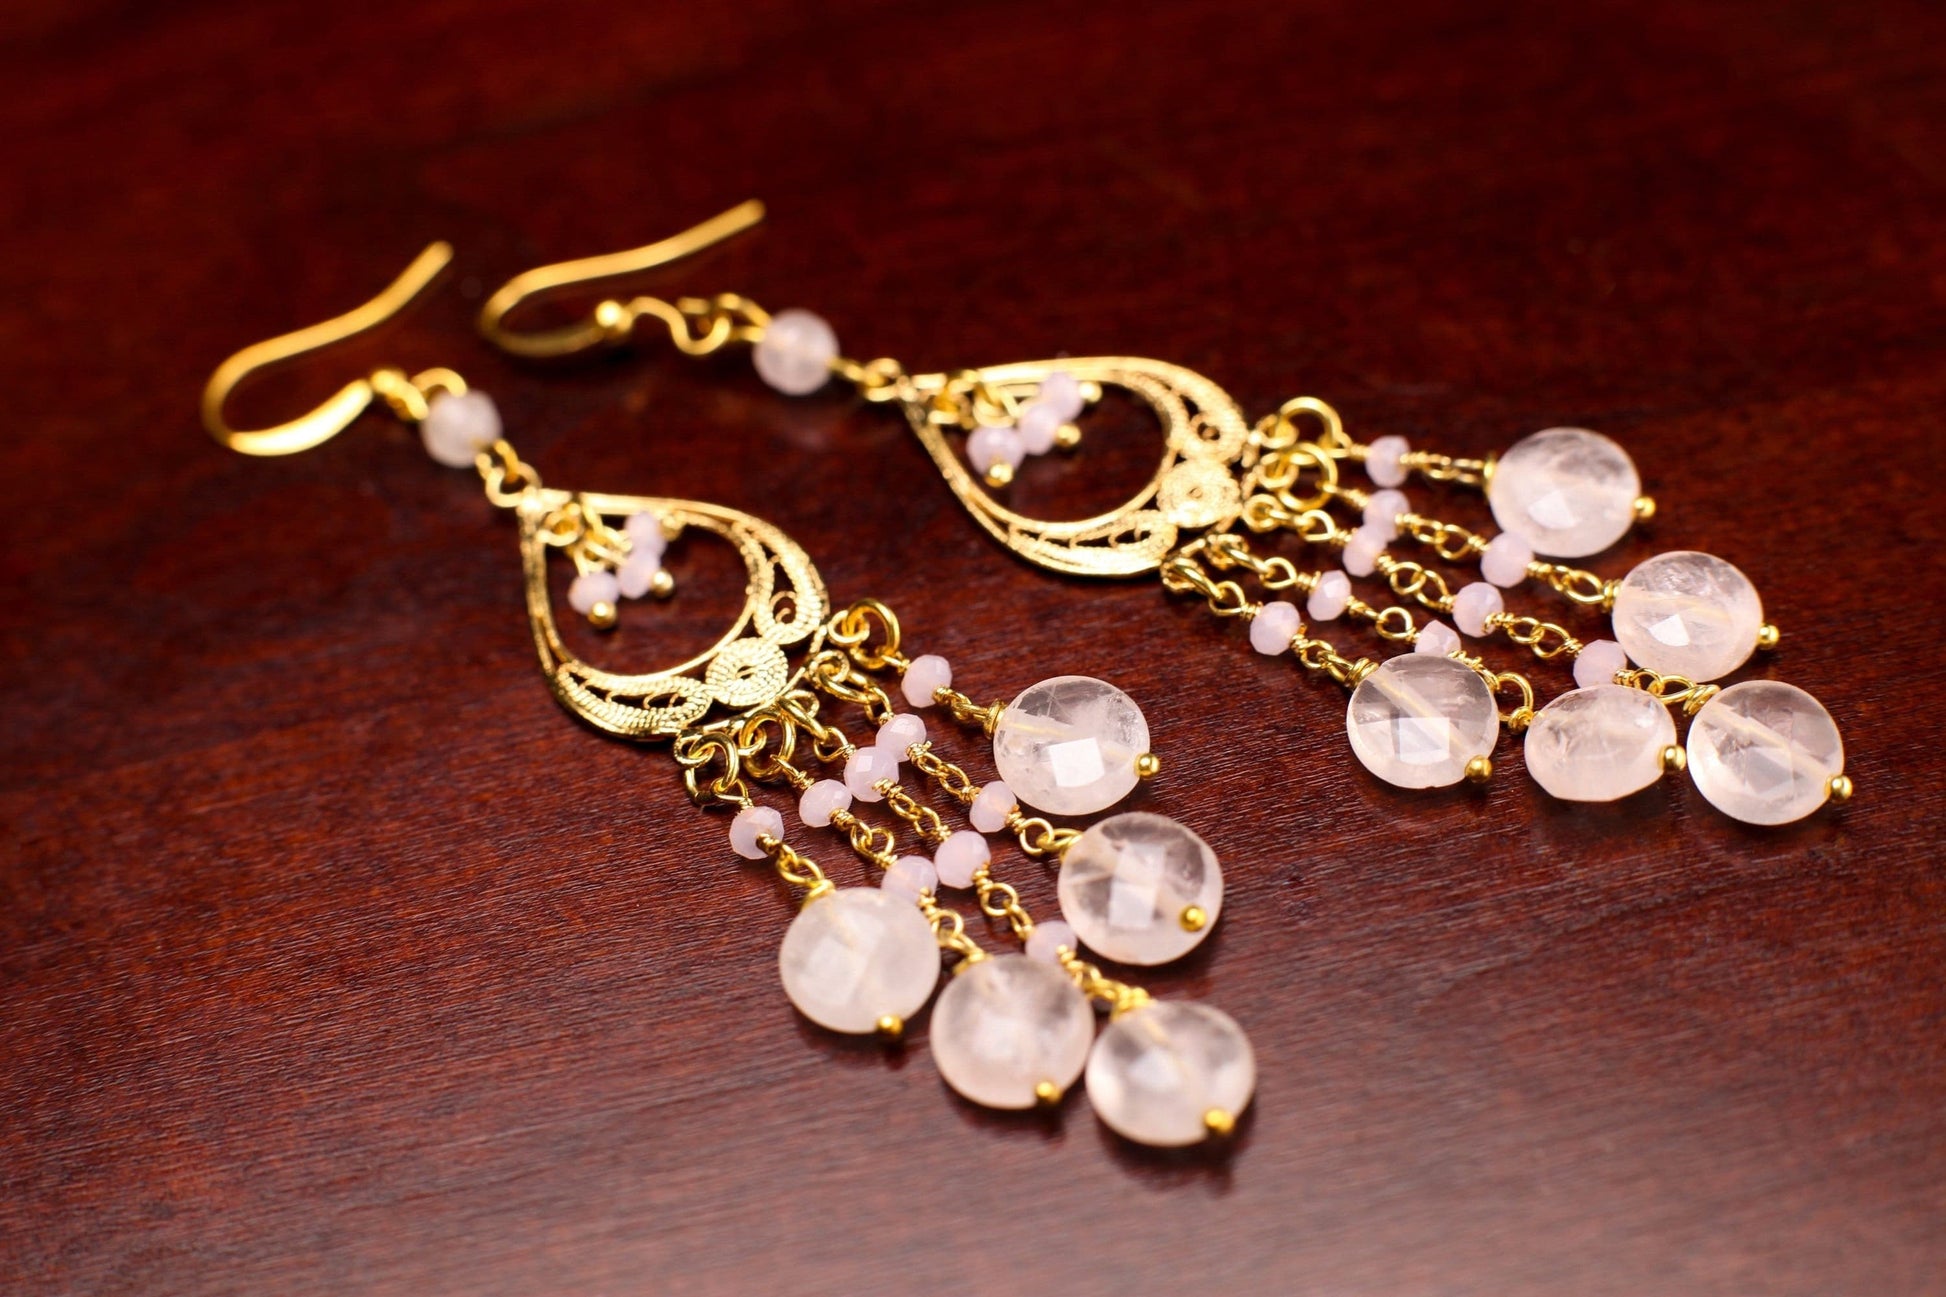 Brazilian Rose Quartz Faceted Coin 8mm Handmade Chandelier Wire Wrapped Dangling Earrings in Gold Vermeil Over 925 Sterling Silver Earwire